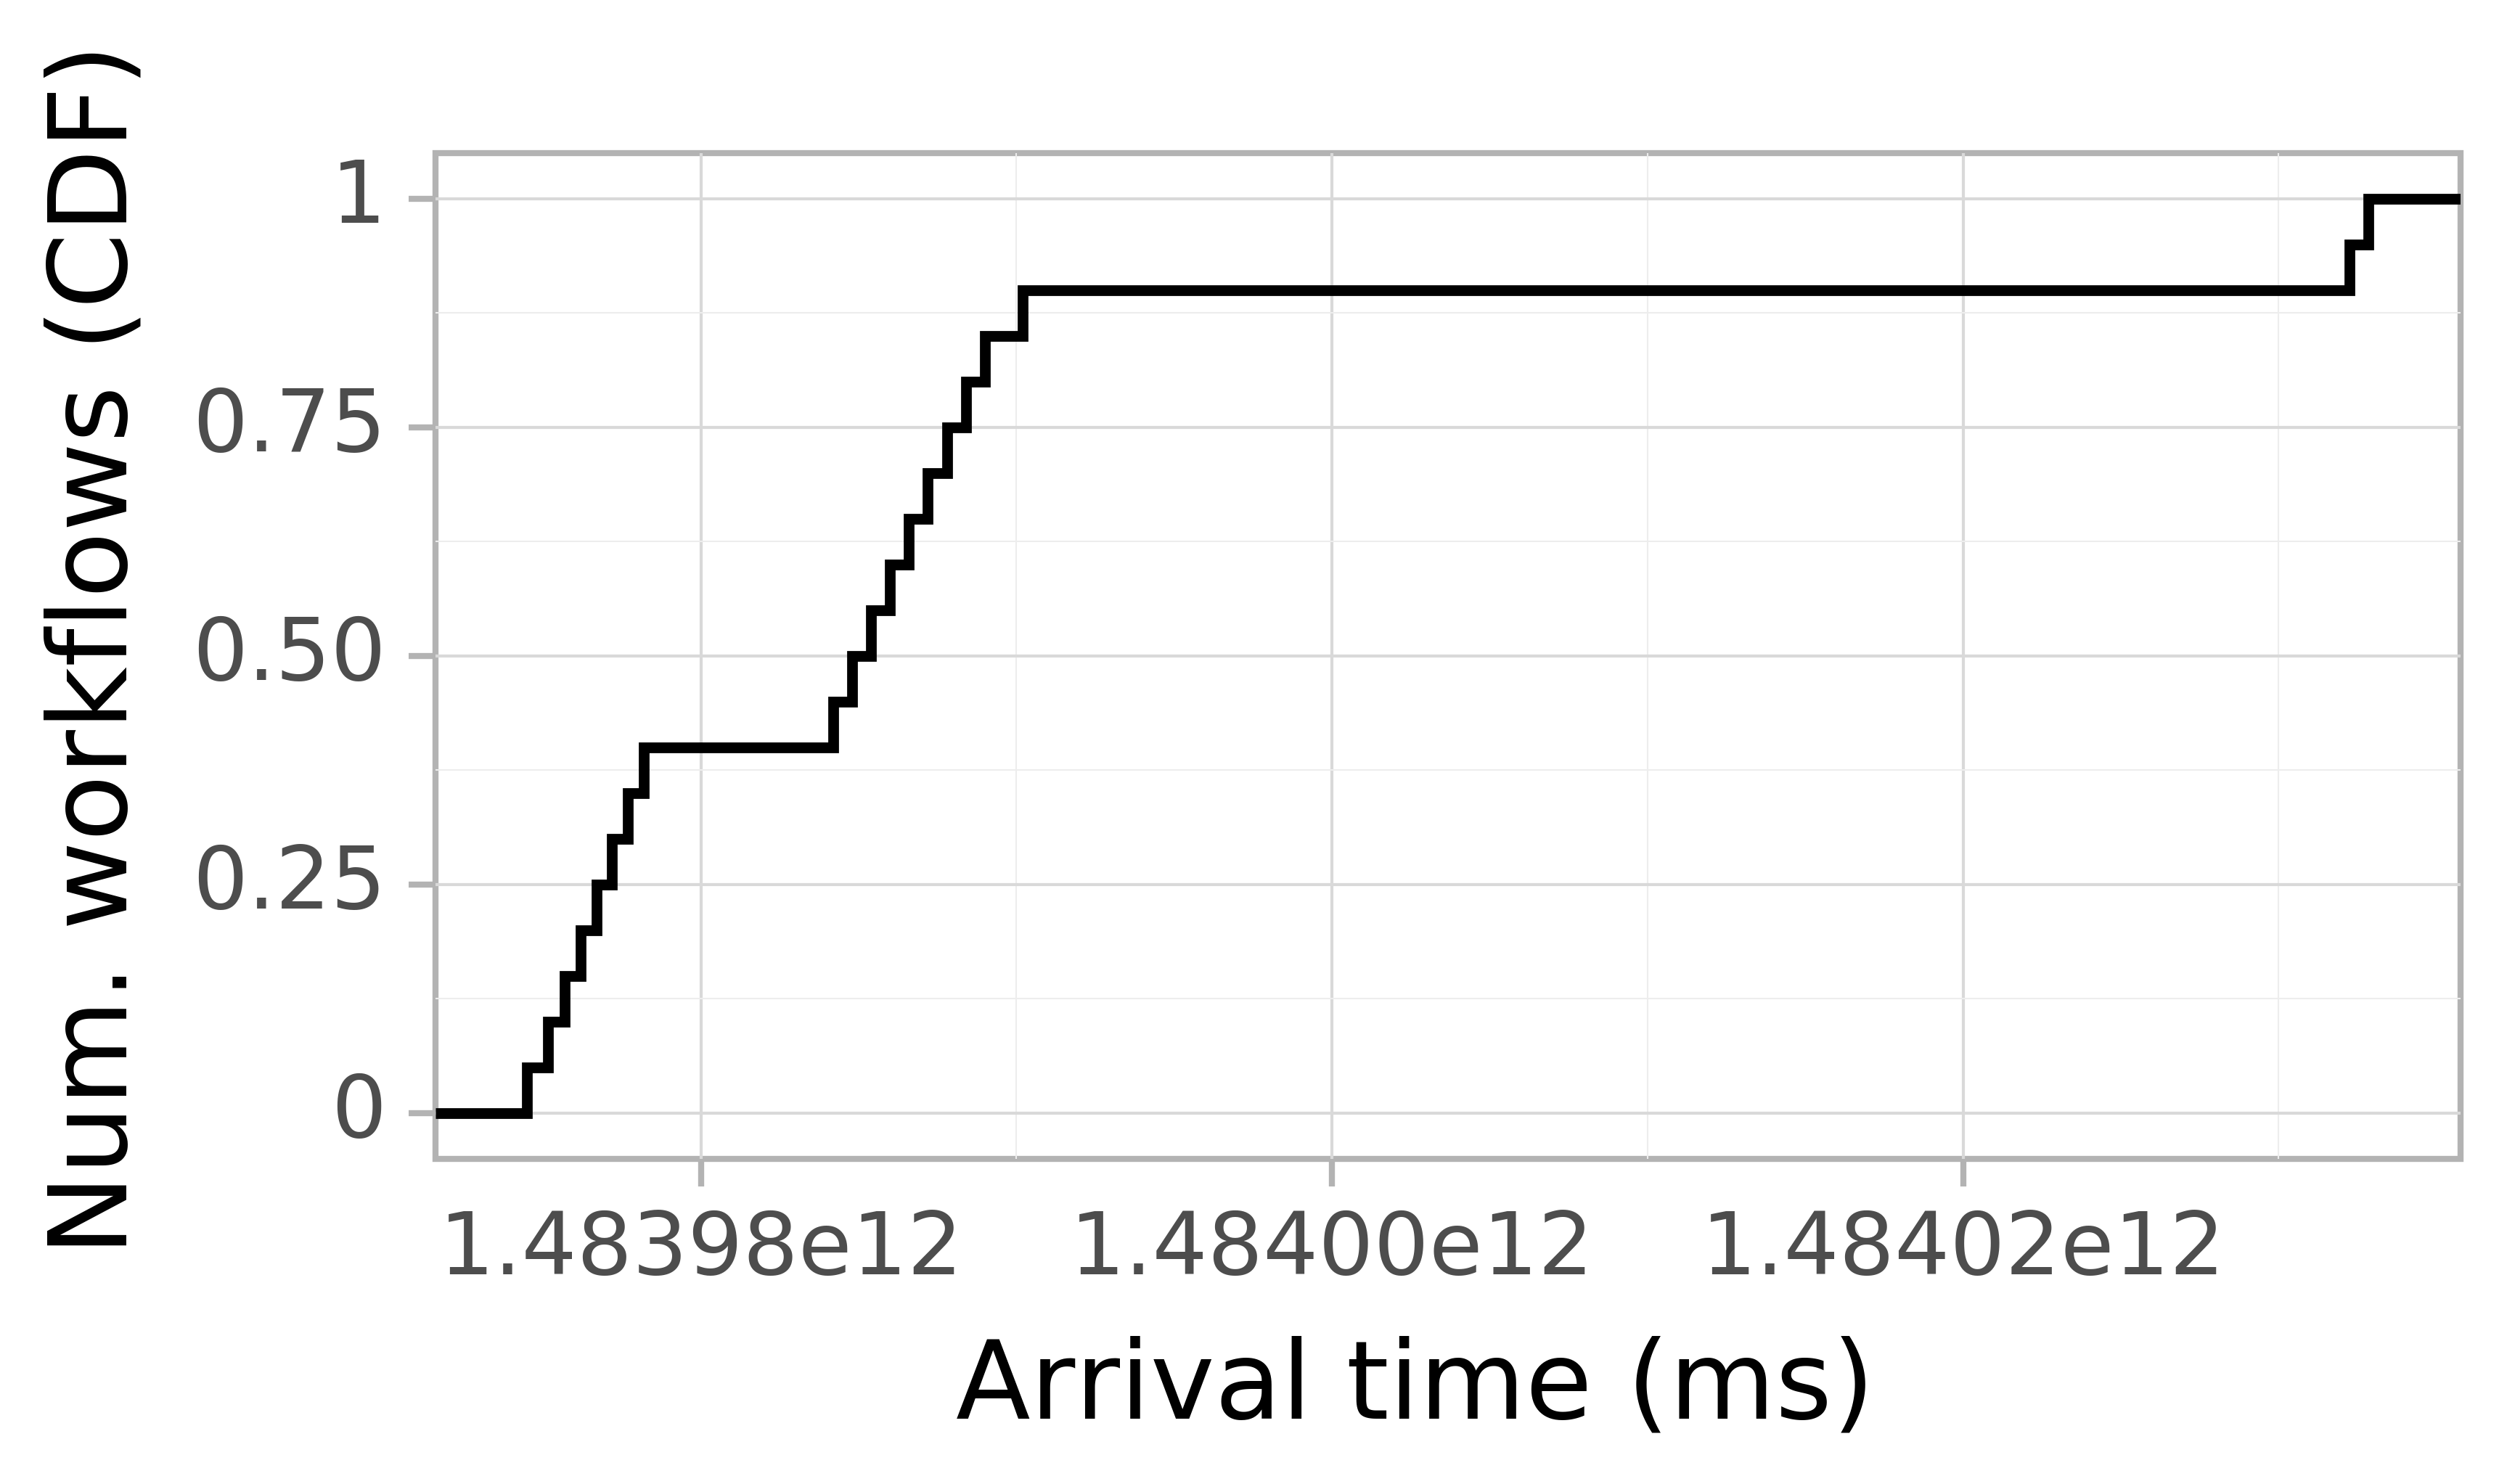 Job arrival CDF graph for the askalon-new_ee16 trace.